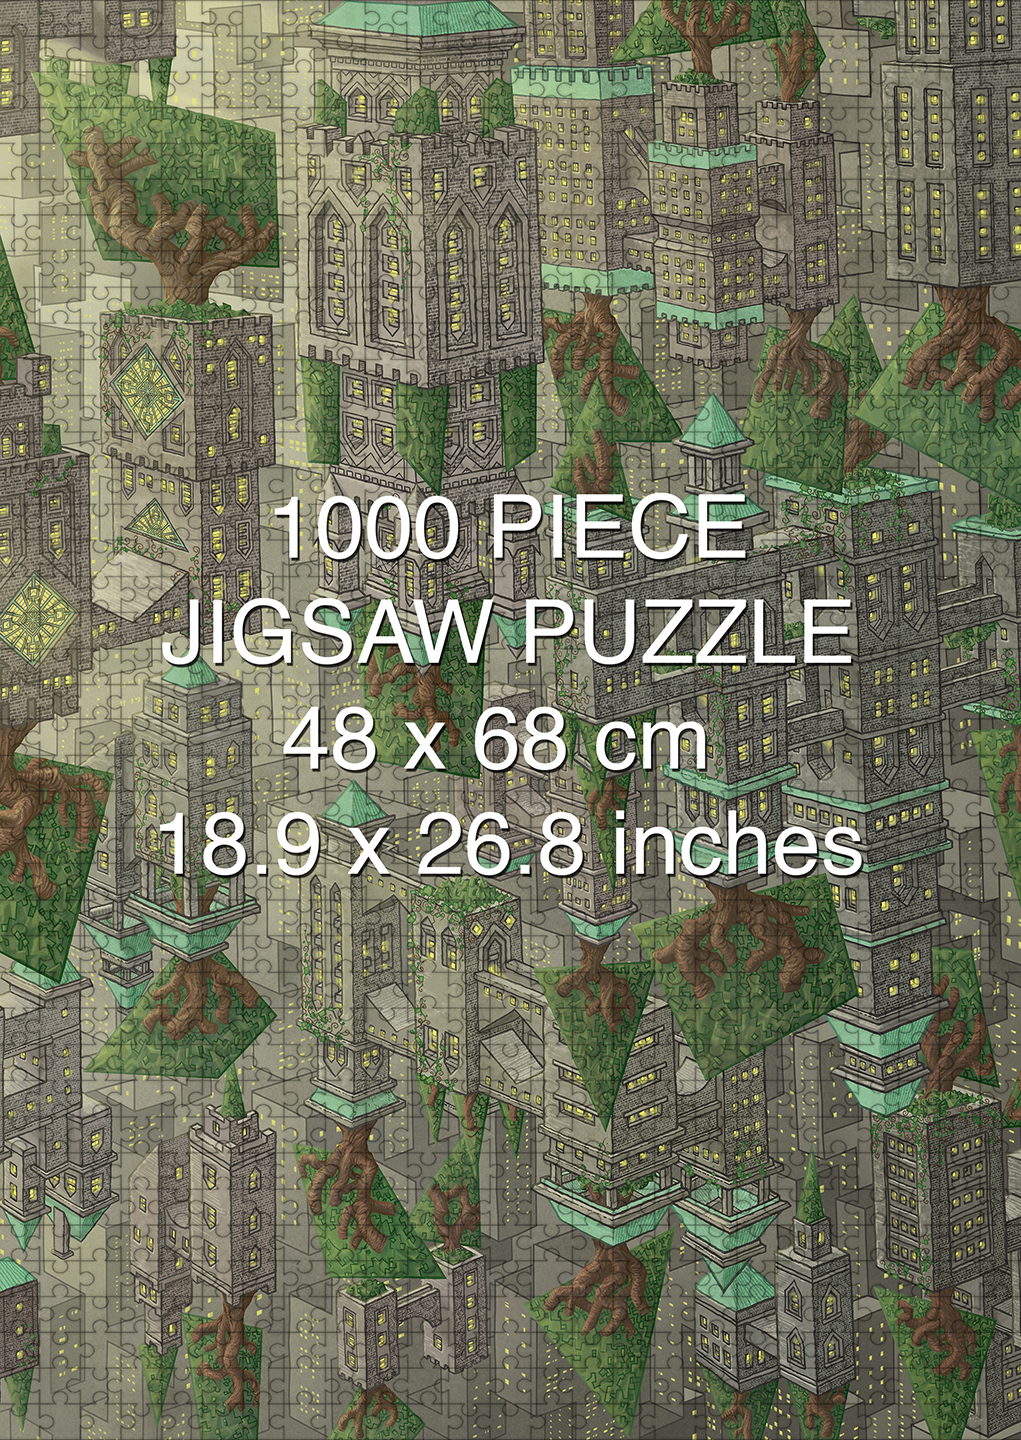 A Delicate Balance: Penrose Heights 1000 piece puzzle by Aaron Wolf and Pandemic Puzzles